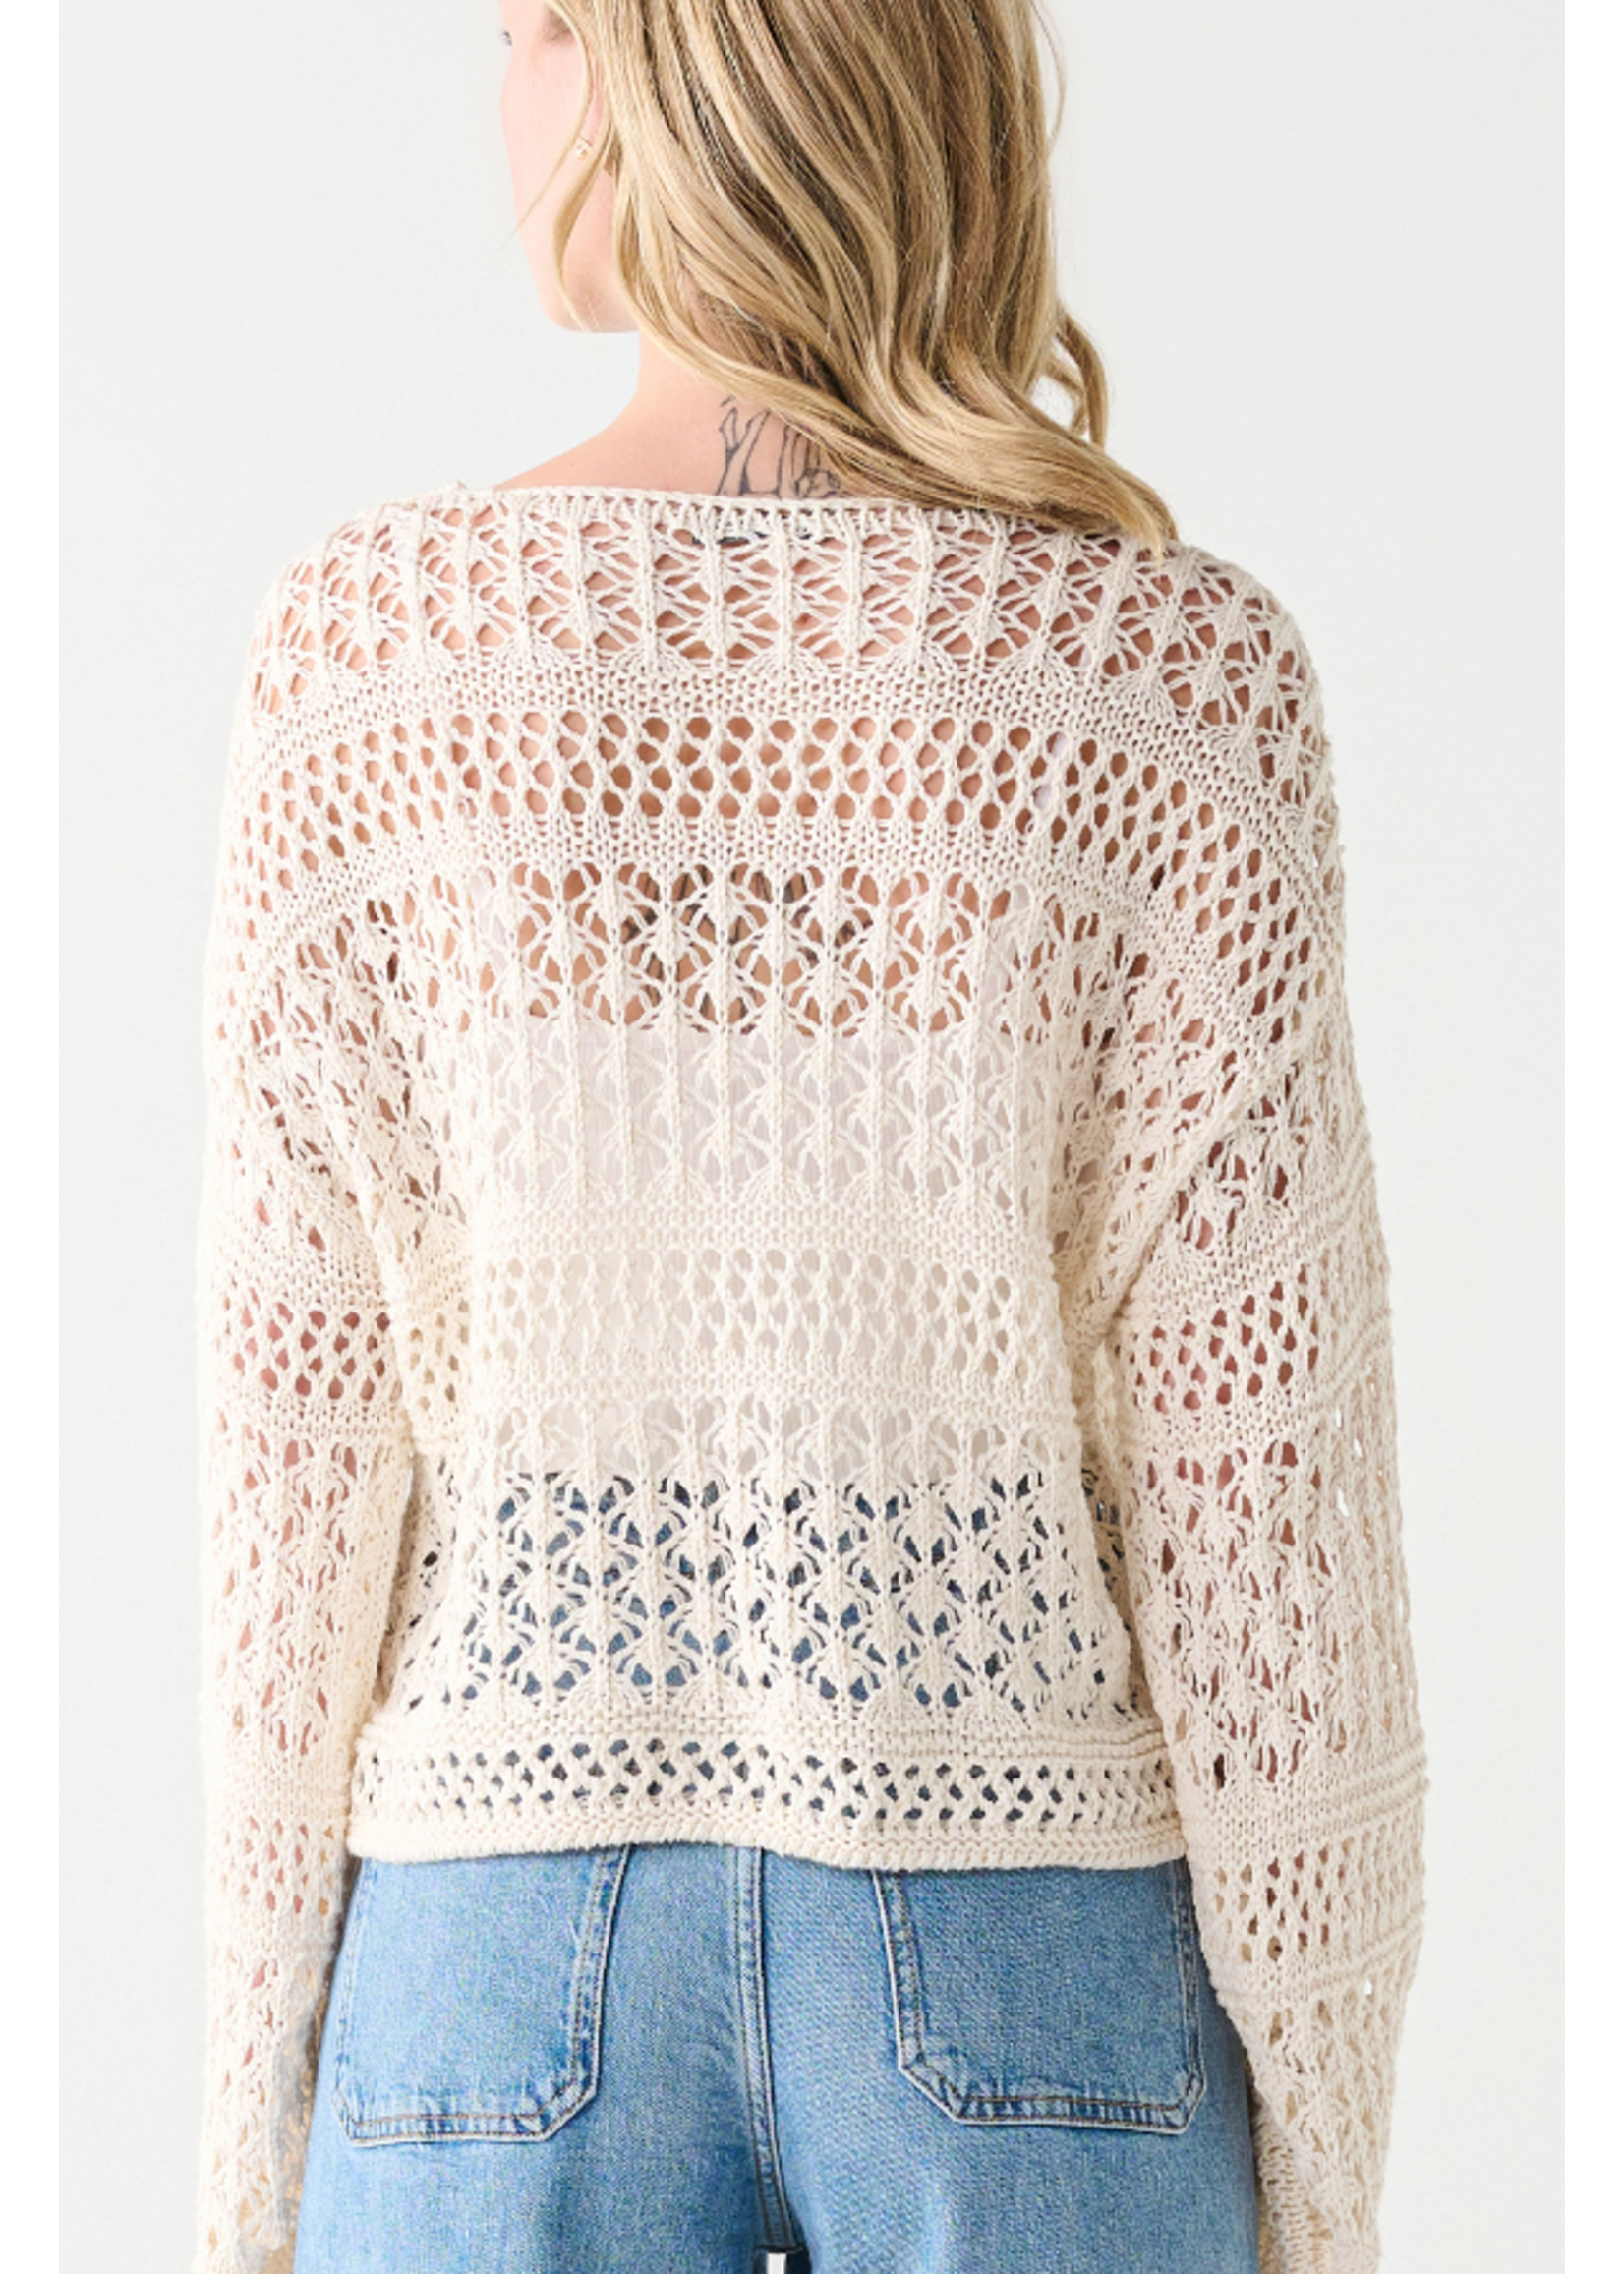 Dex Clothing LACE UP CROCHET SWEATER